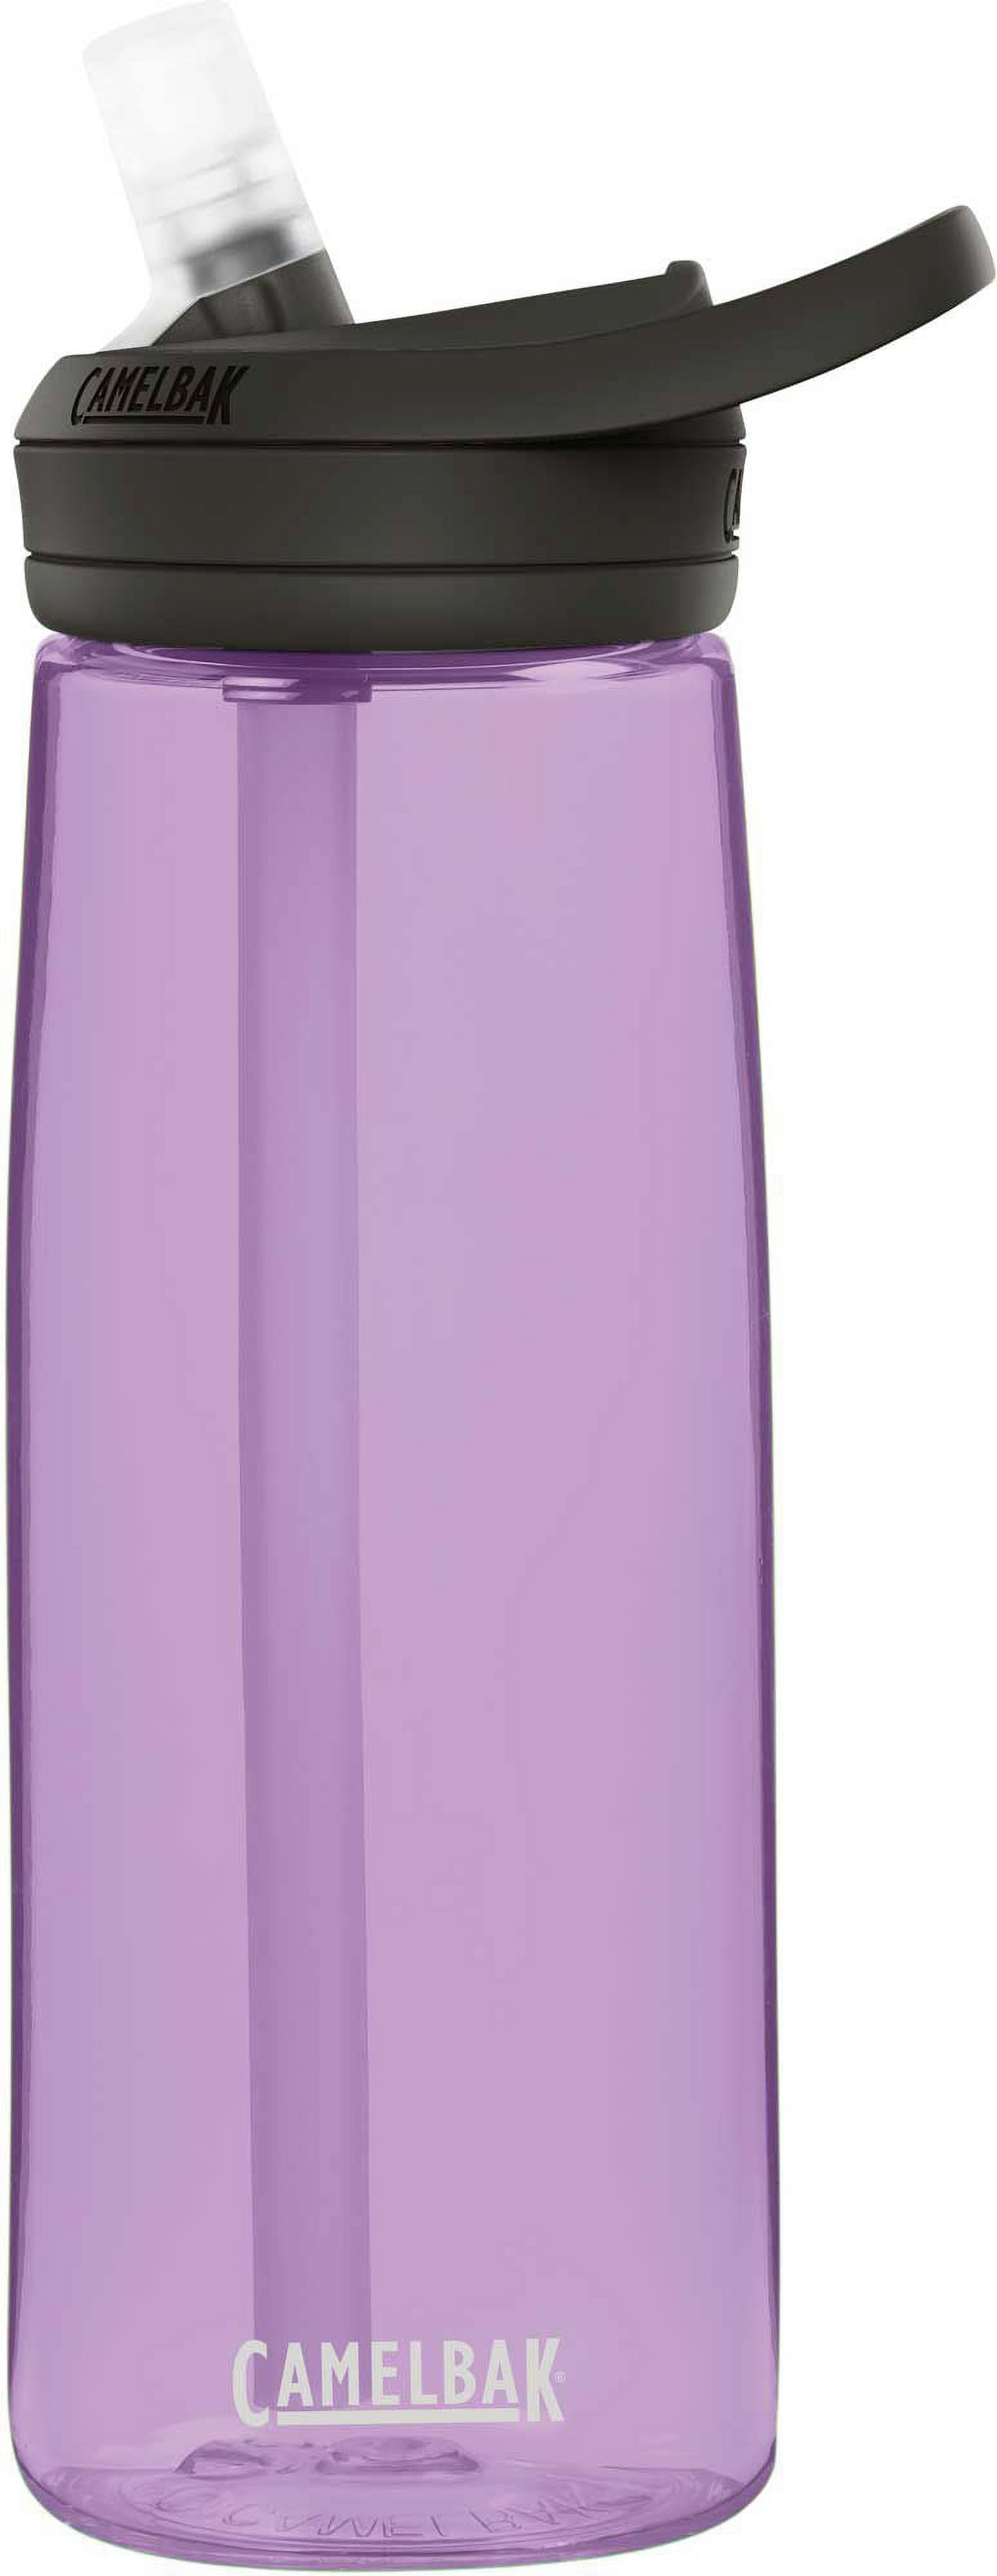 CamelBak 25oz Eddy+ Vacuum Insulated Stainless Steel Water Bottle - Pink  Melon Ombre